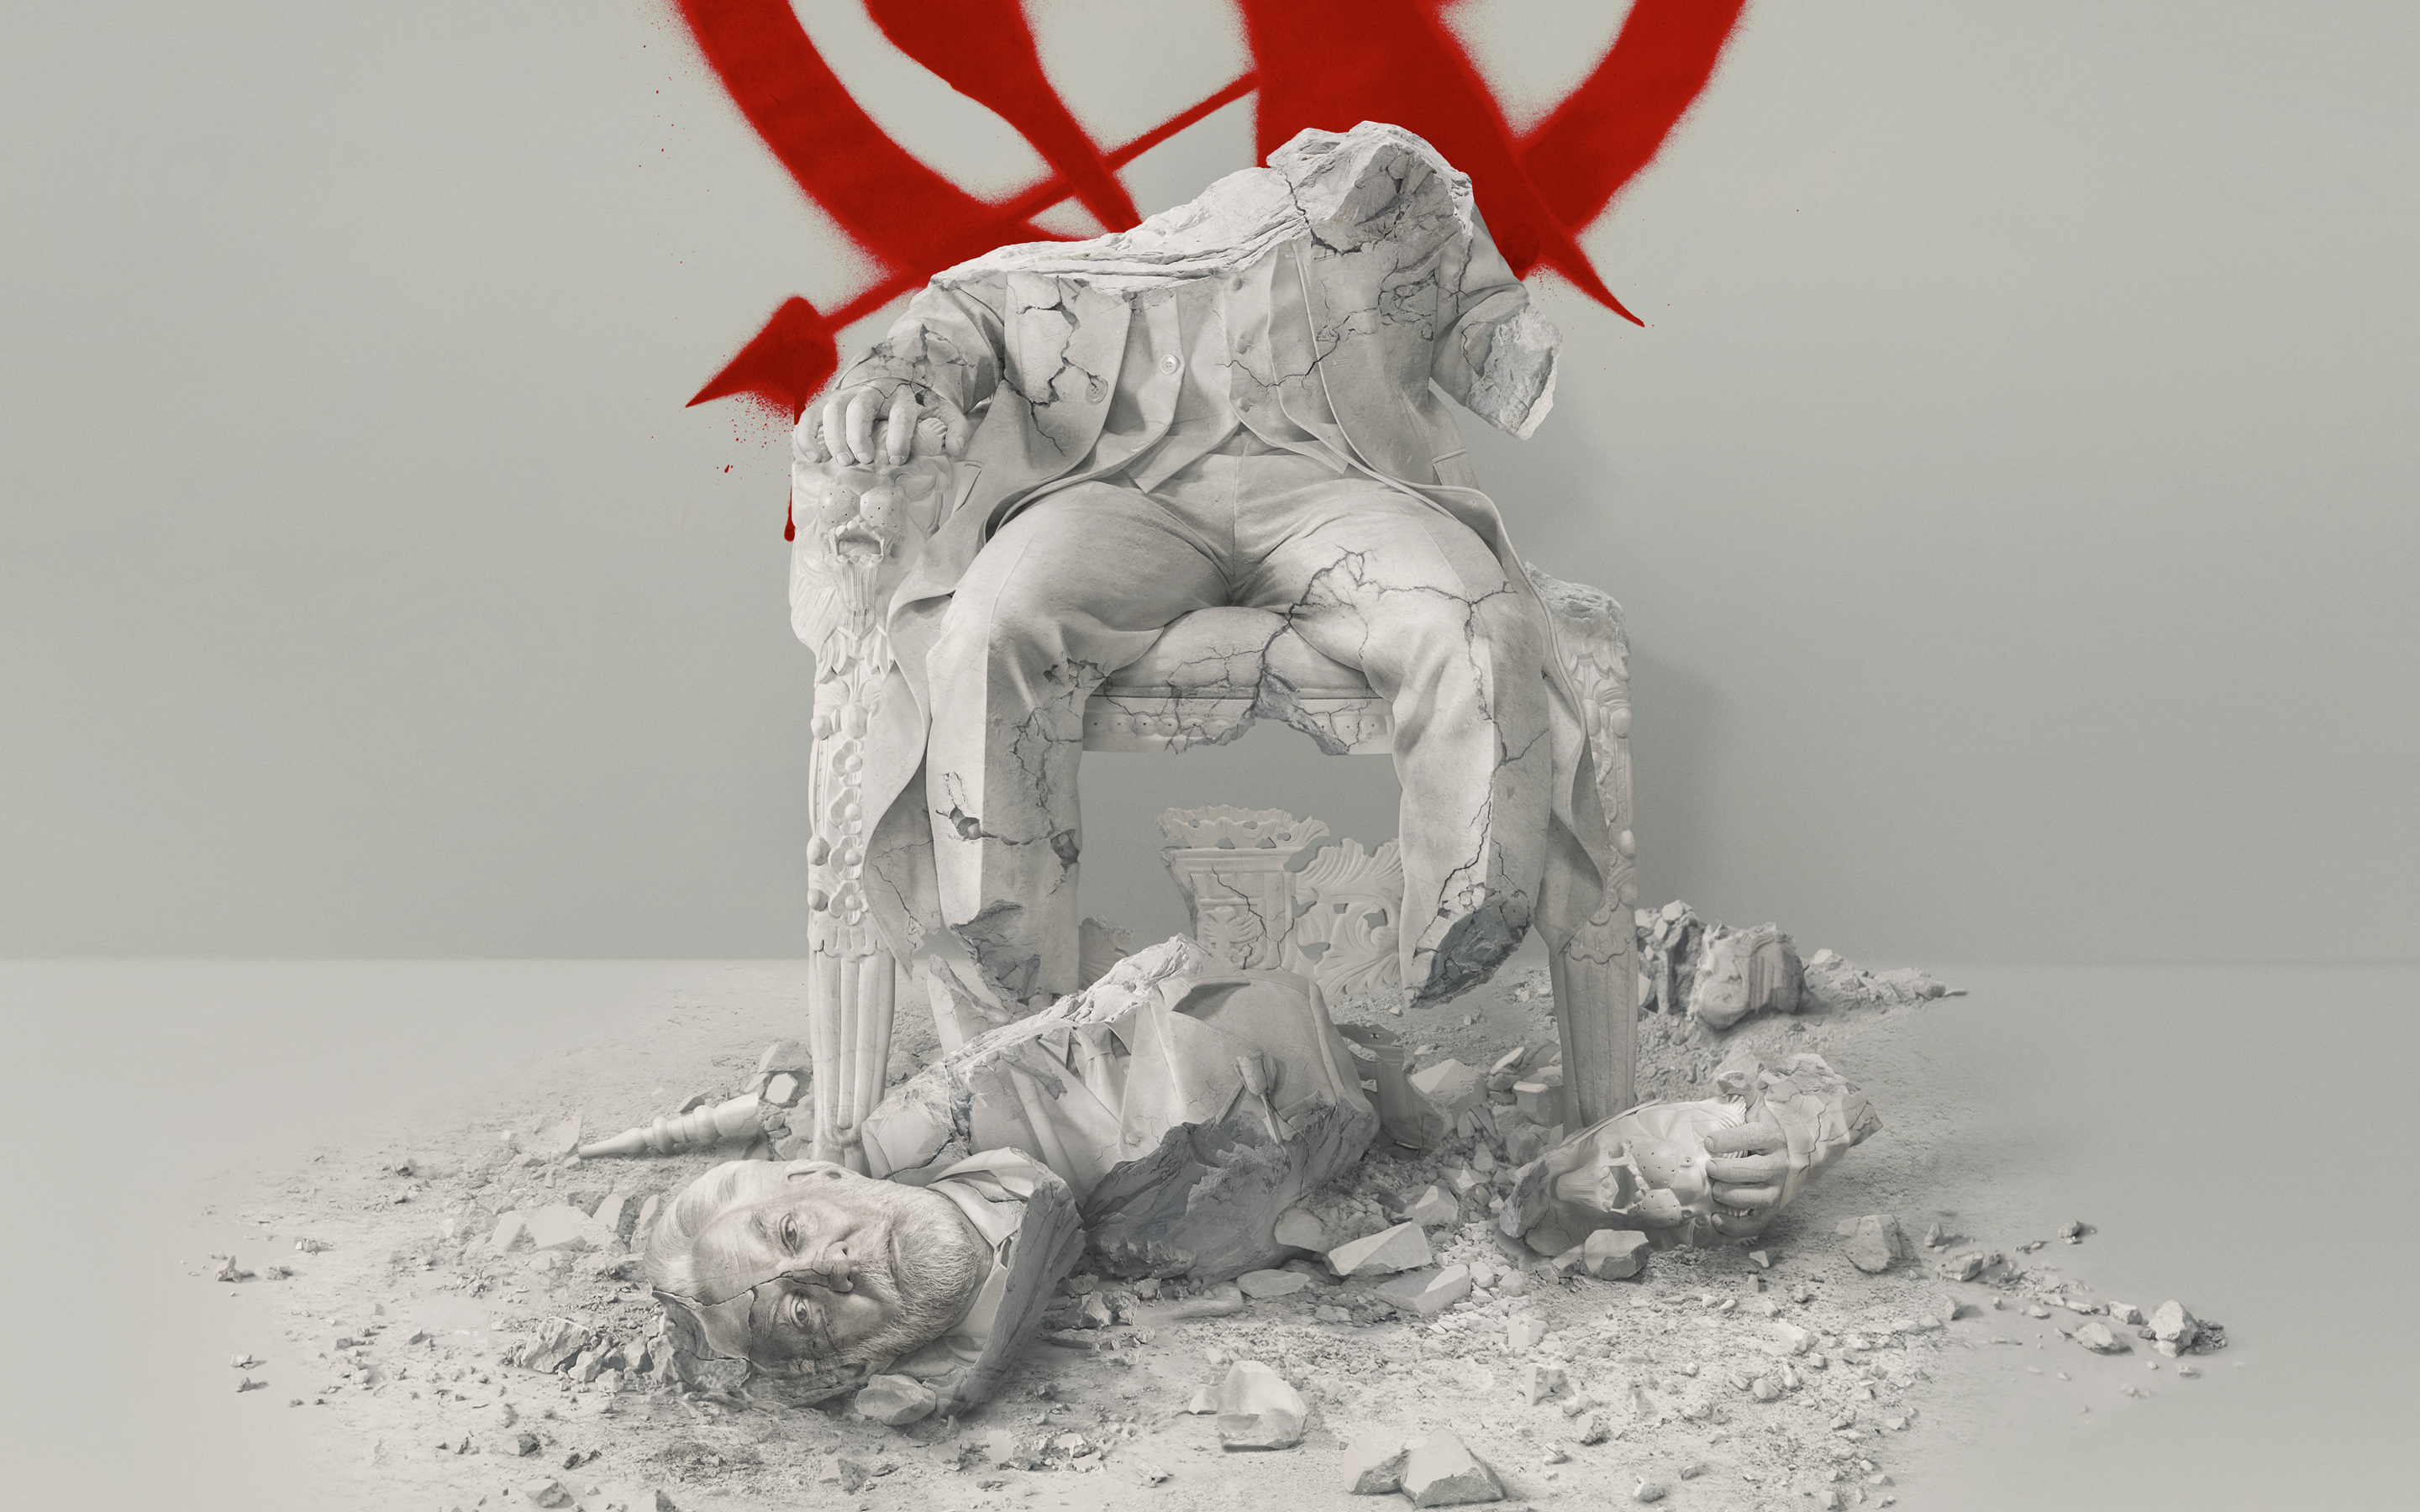 The Hunger Games Mockingjay Part 2 2880x1800